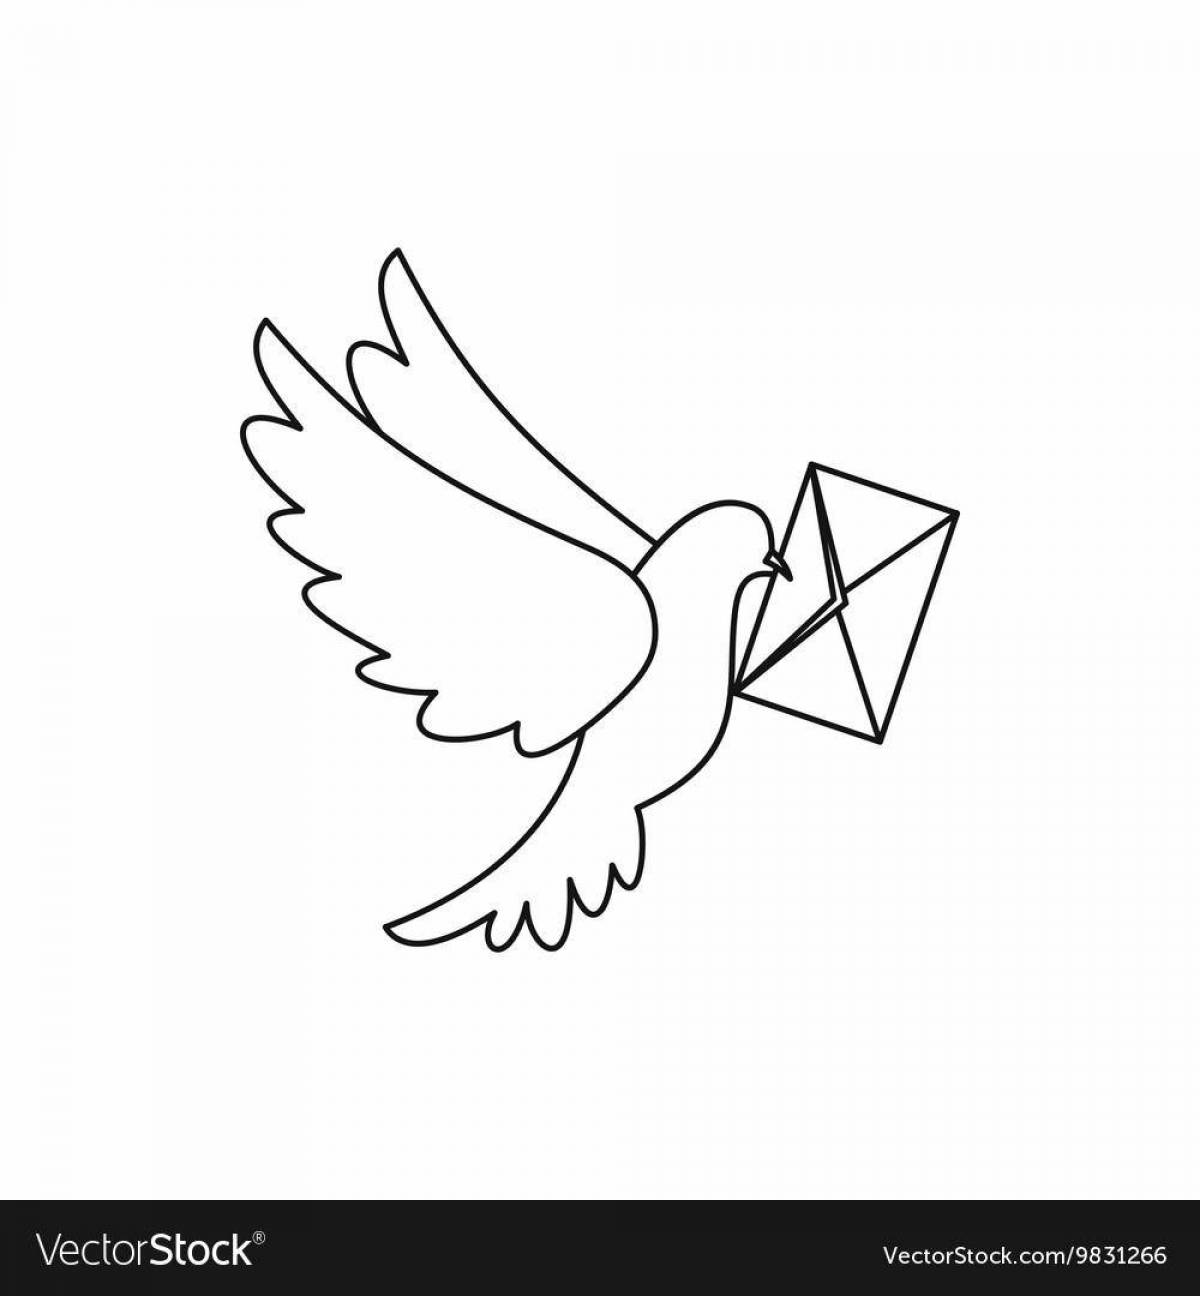 Coloring book cheerful messenger pigeon